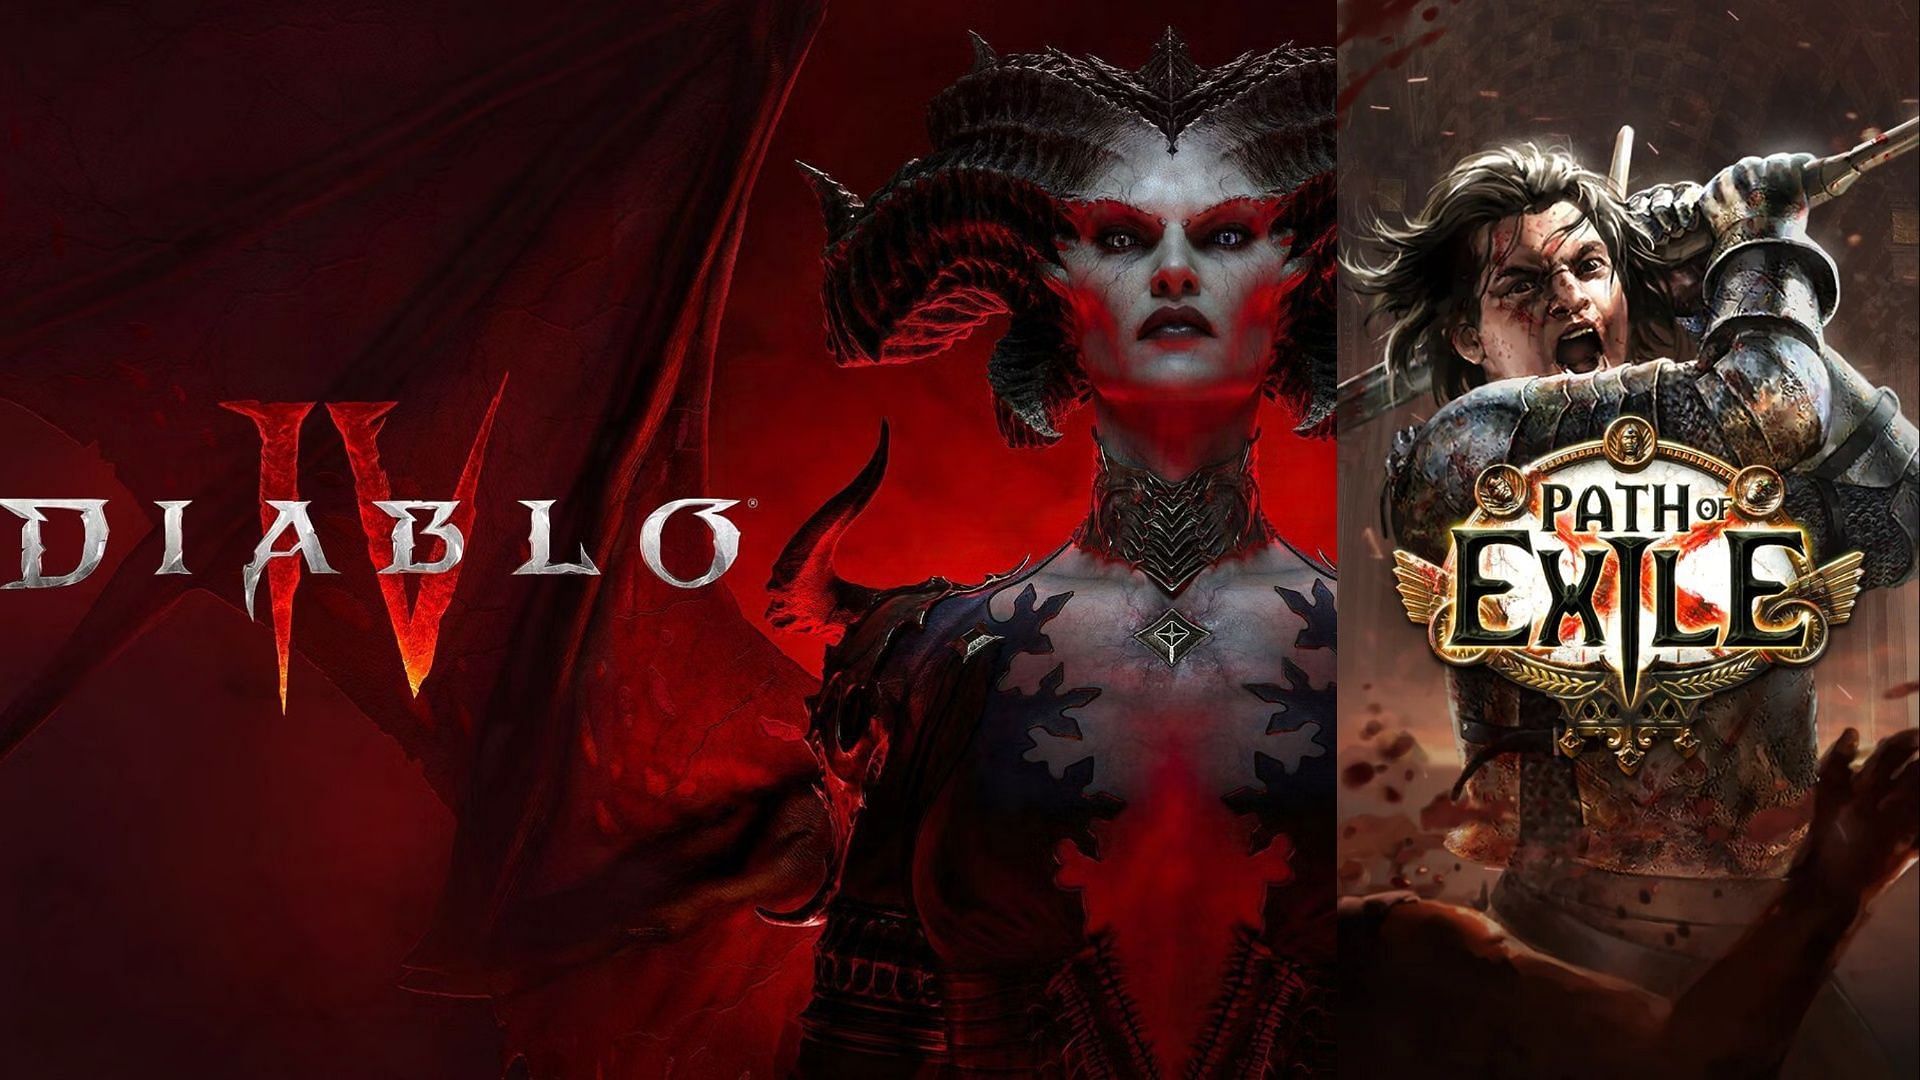 Image of Lilith on the left and Path of Exile logo on the right.